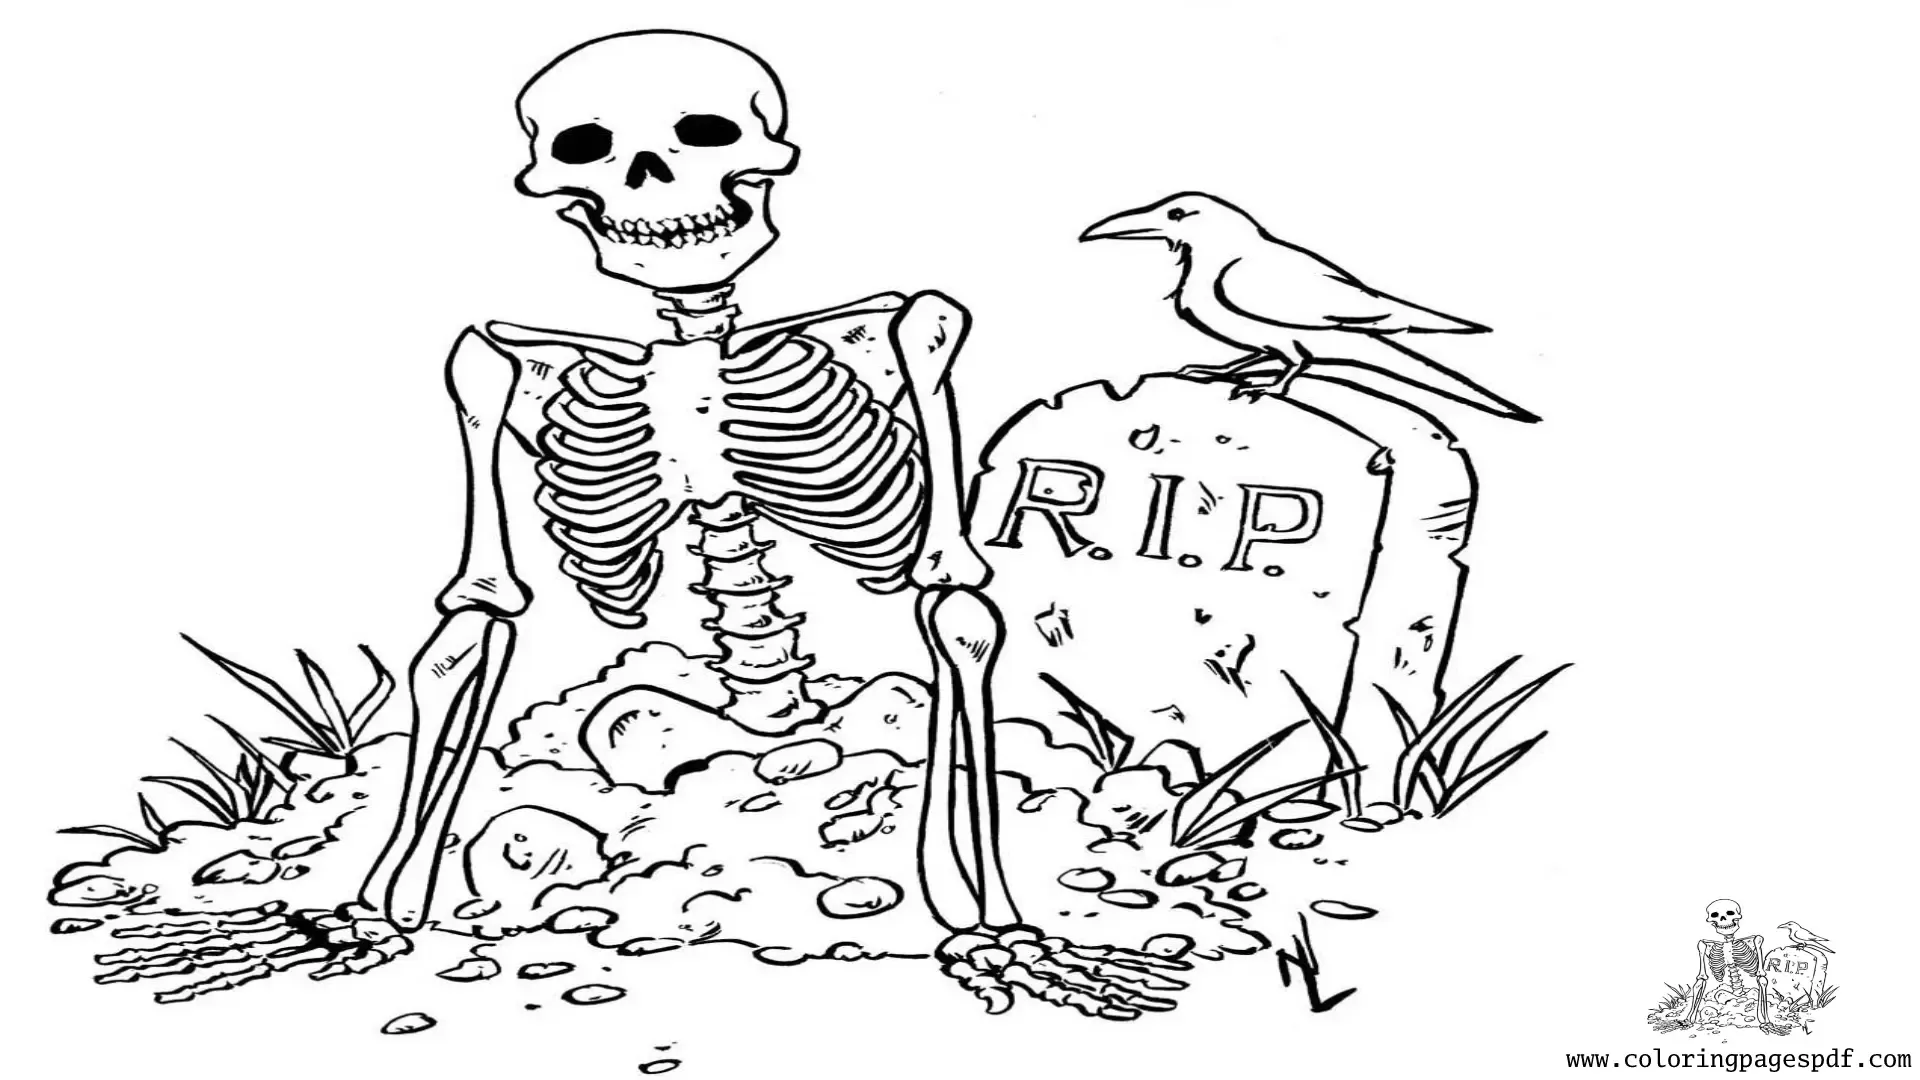 Coloring Page Of A Skeleton Coming Out Of Grave